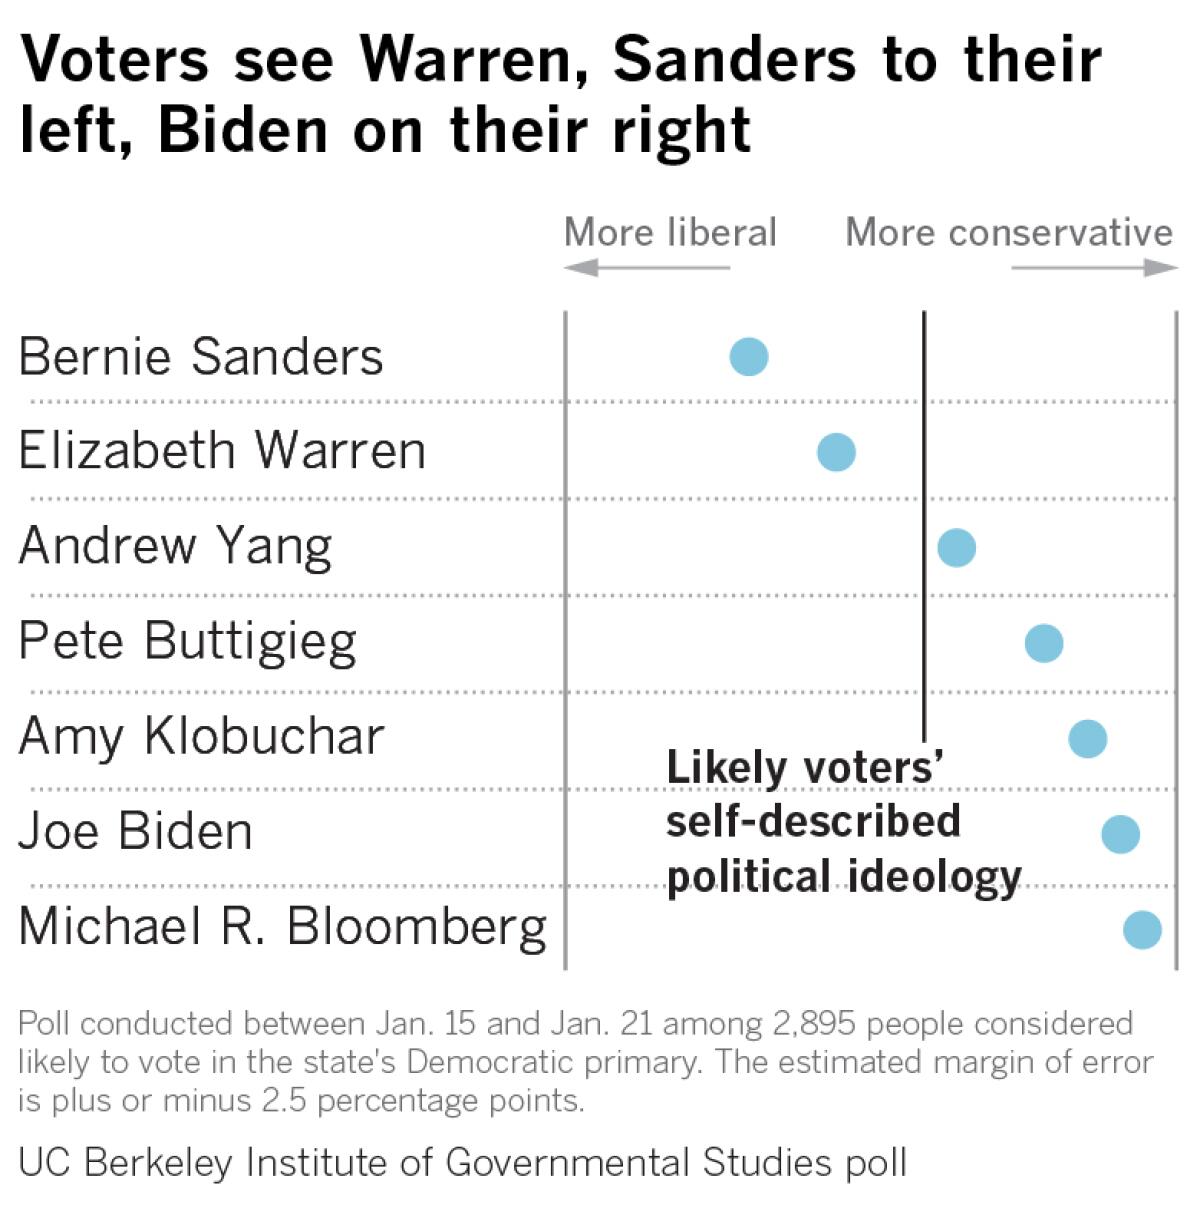 Sanders, Warren further to the left than likely primary voters